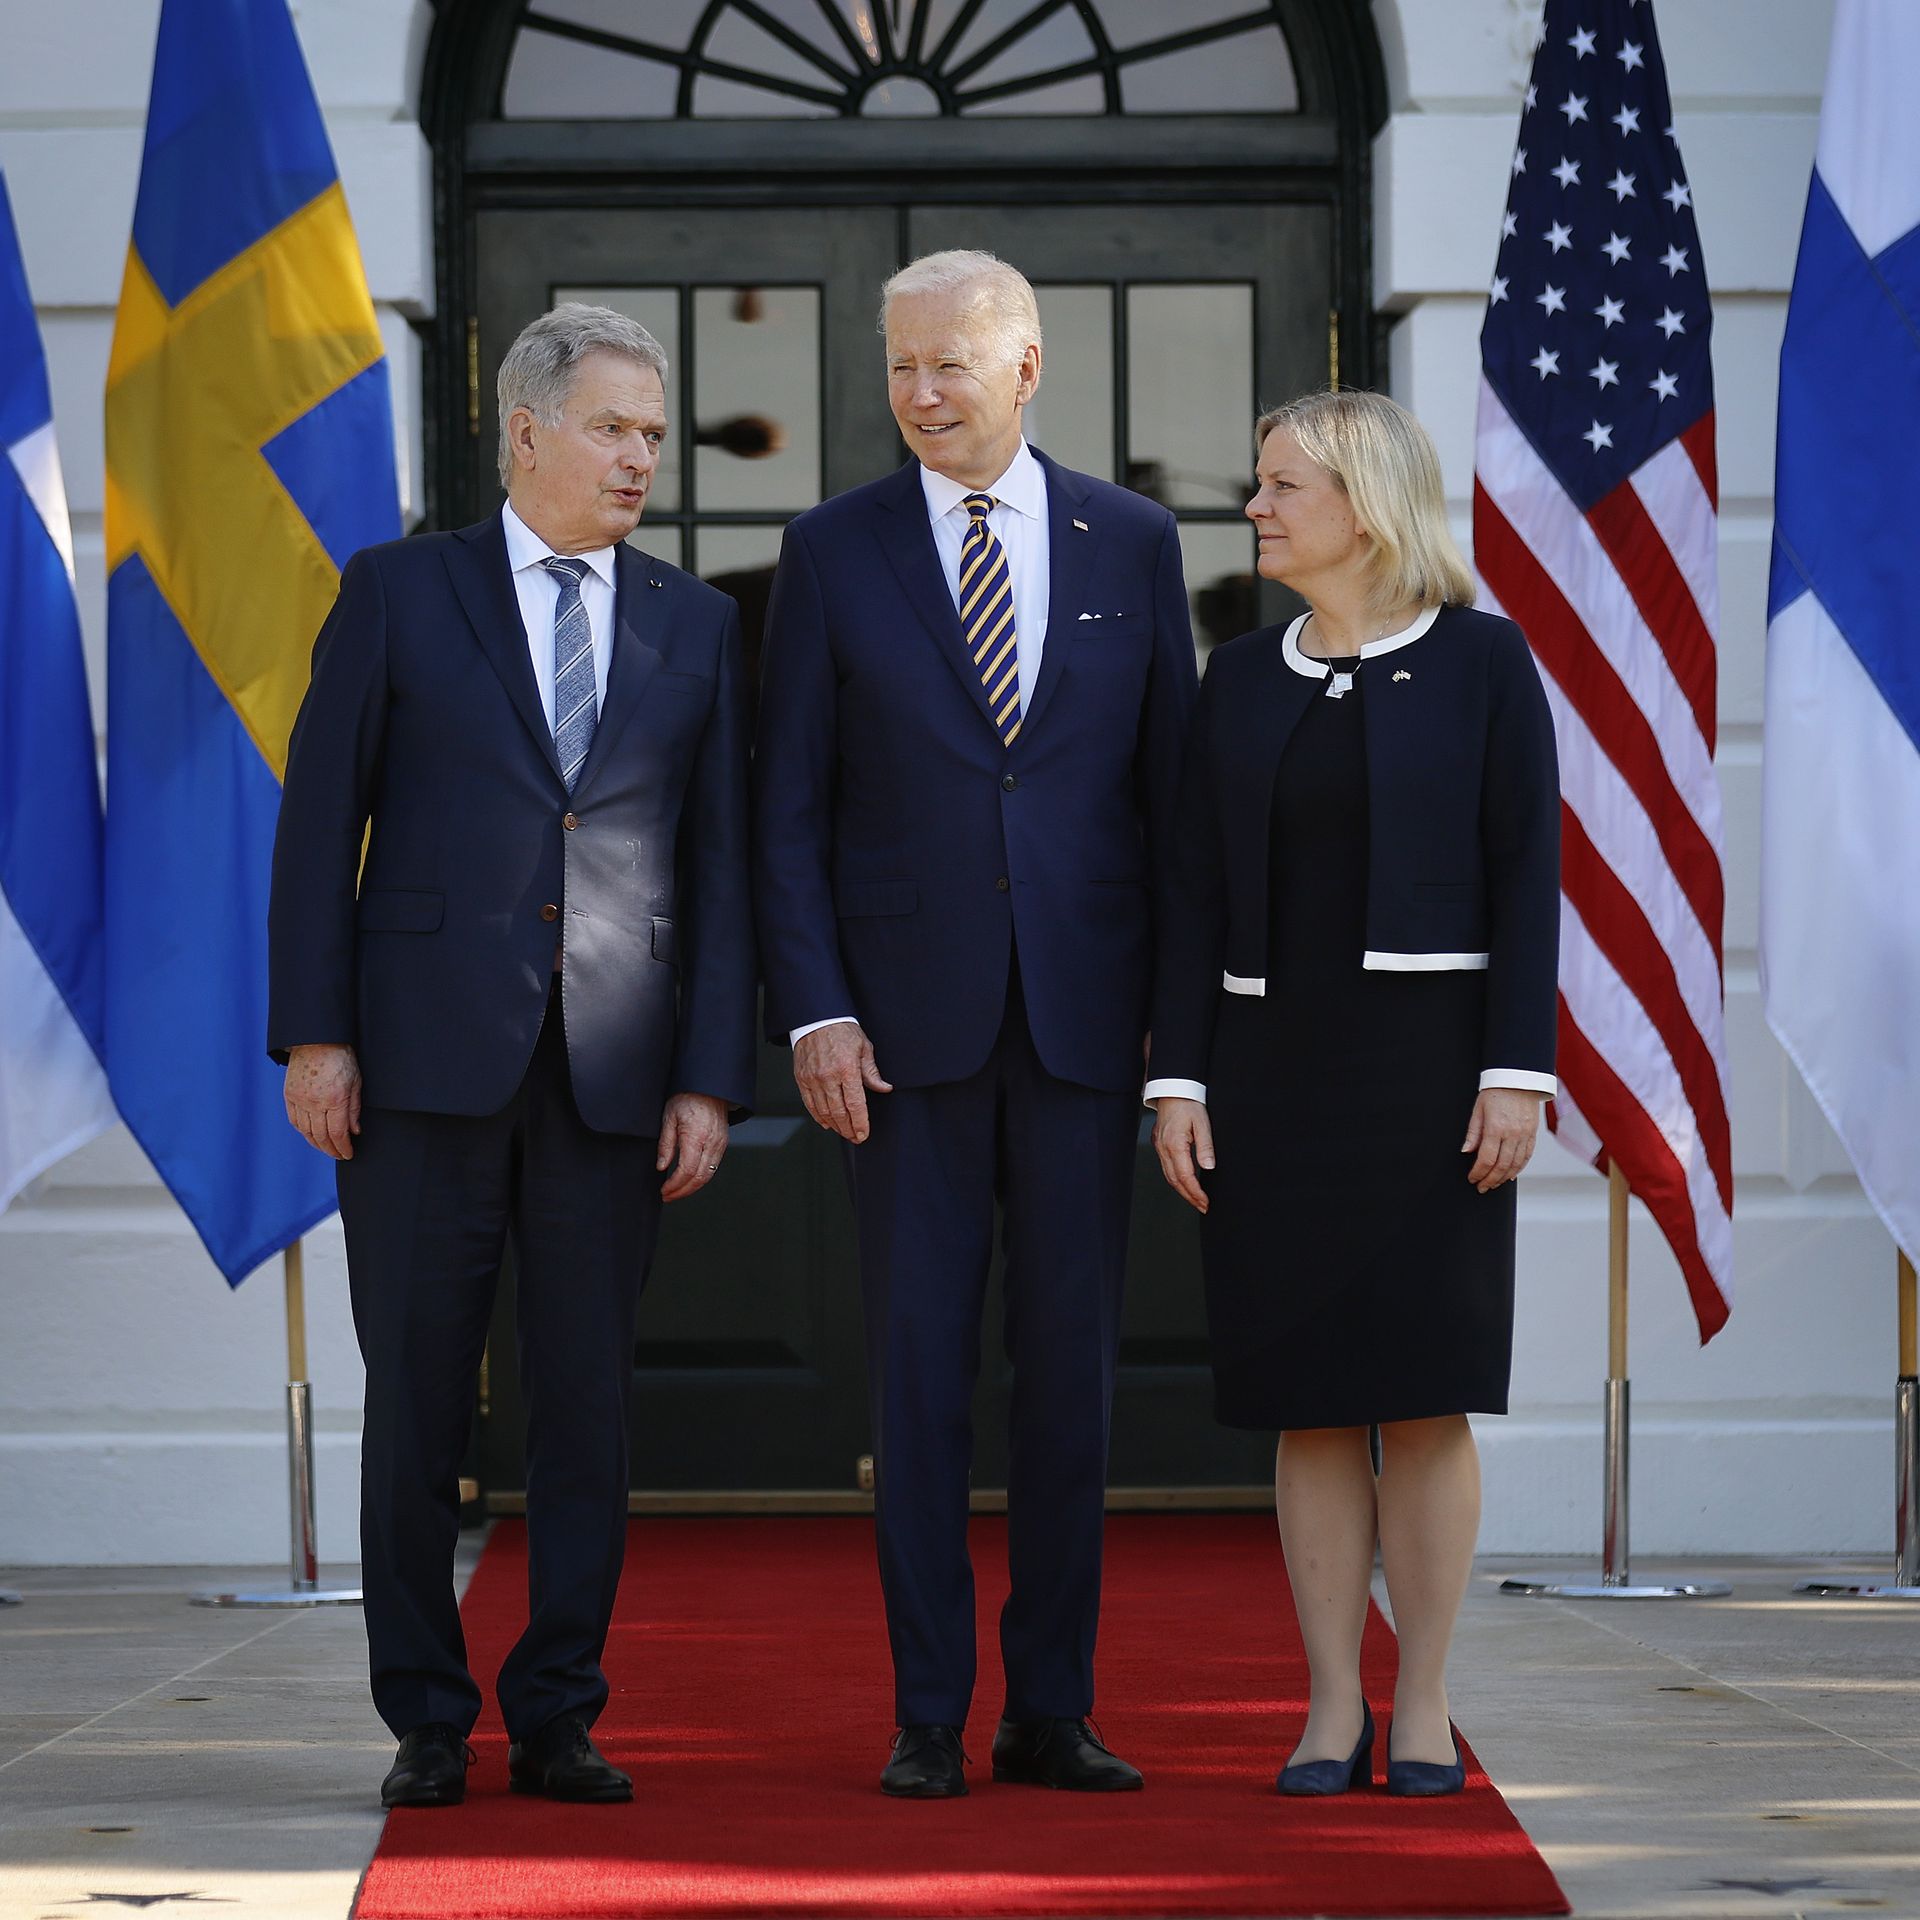 Biden with the leaders of Sweden and Finland